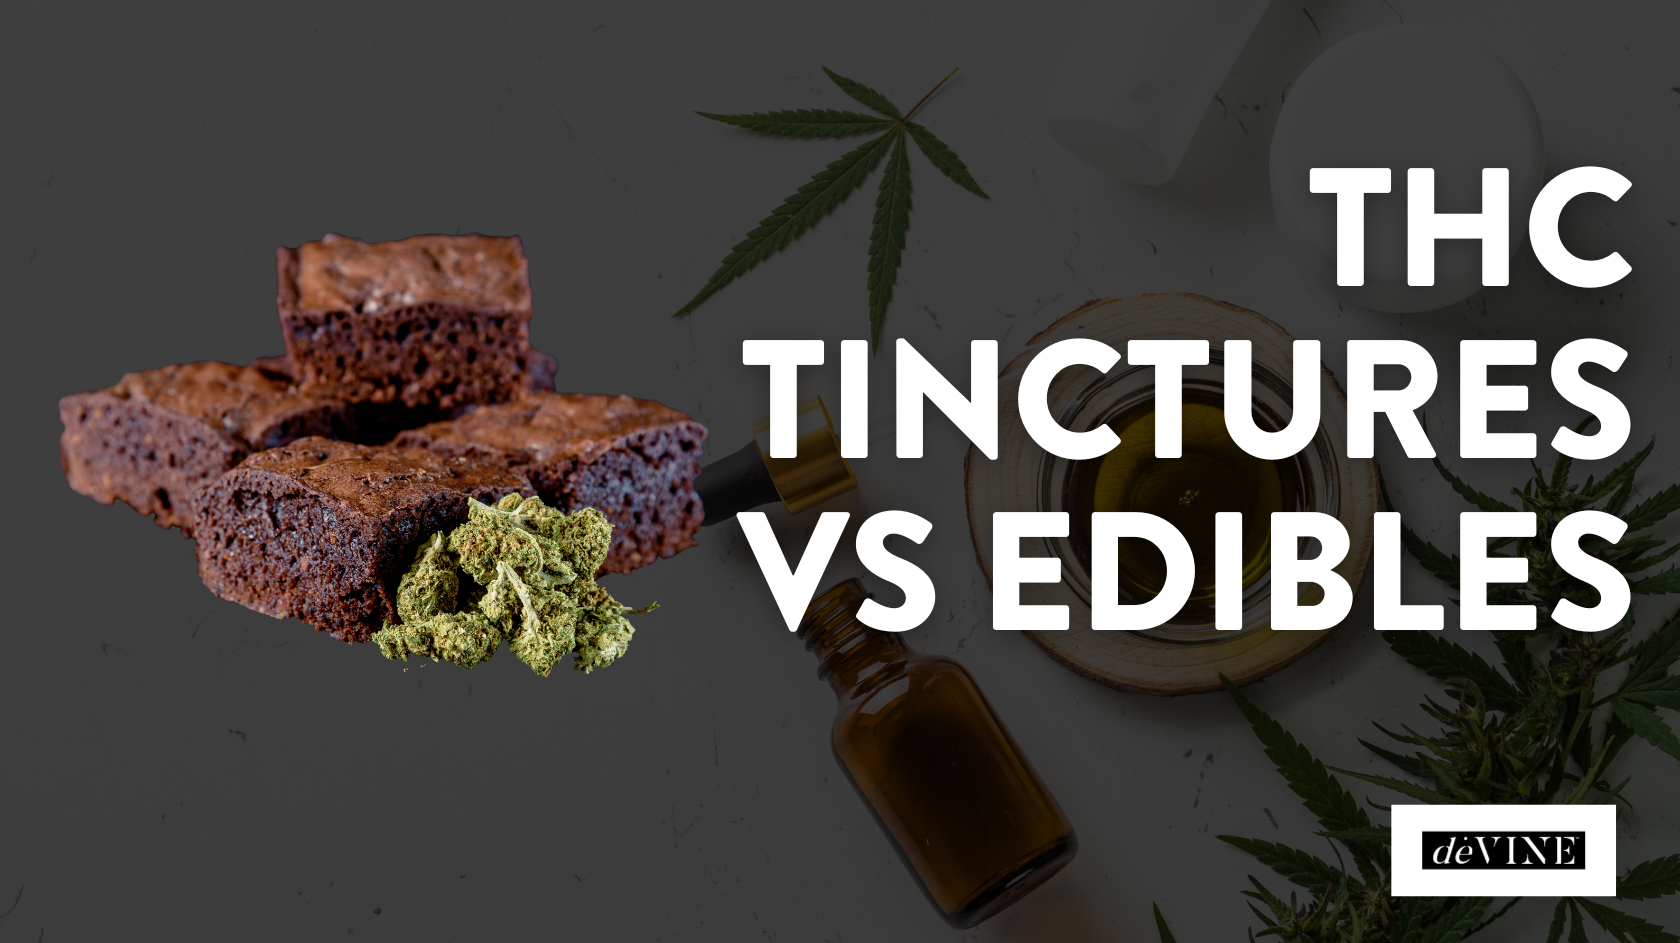 THC Tinctures vs Edibles: The Ultimate Showdown - Who Wins the Cannabis Battle?